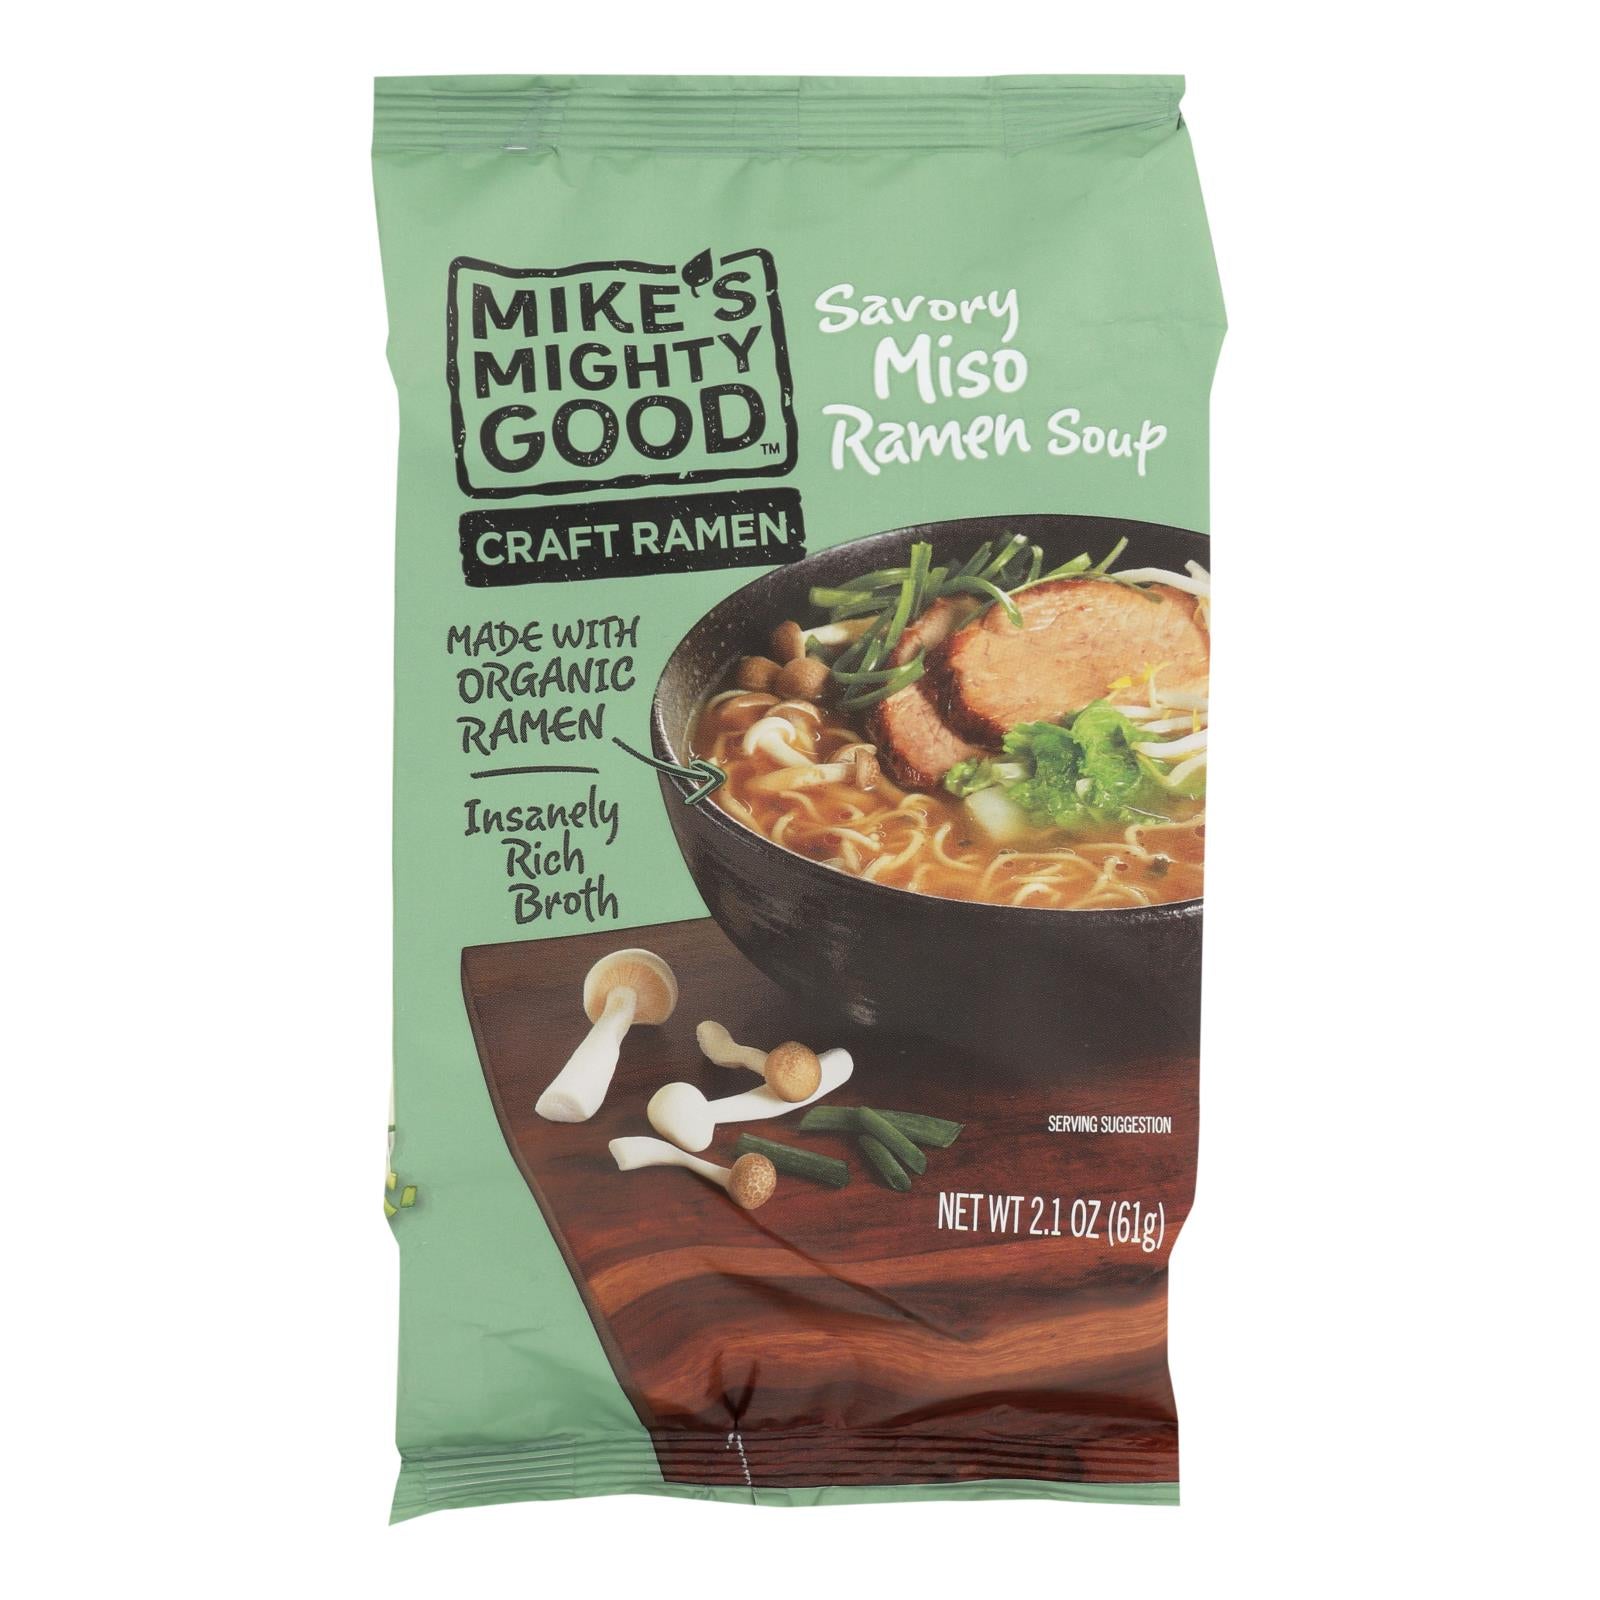 Mike's Mighty Good Savory Miso Ramen Soup - Case Of 7 - 2.1 Oz